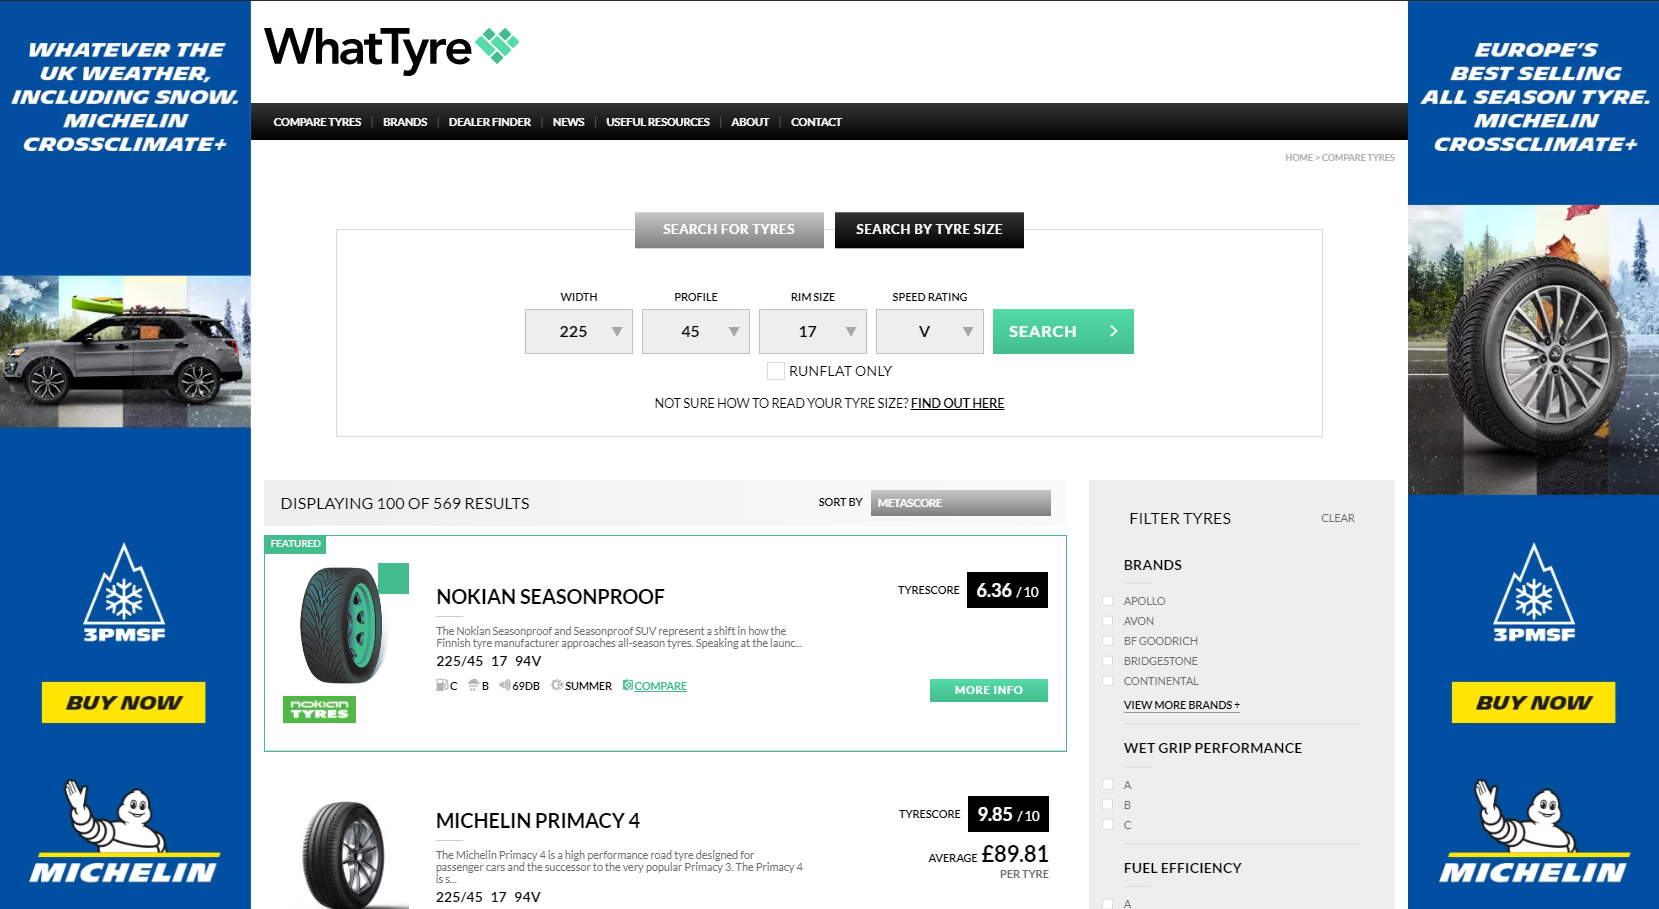 More online tyre retail means more pre-sale research